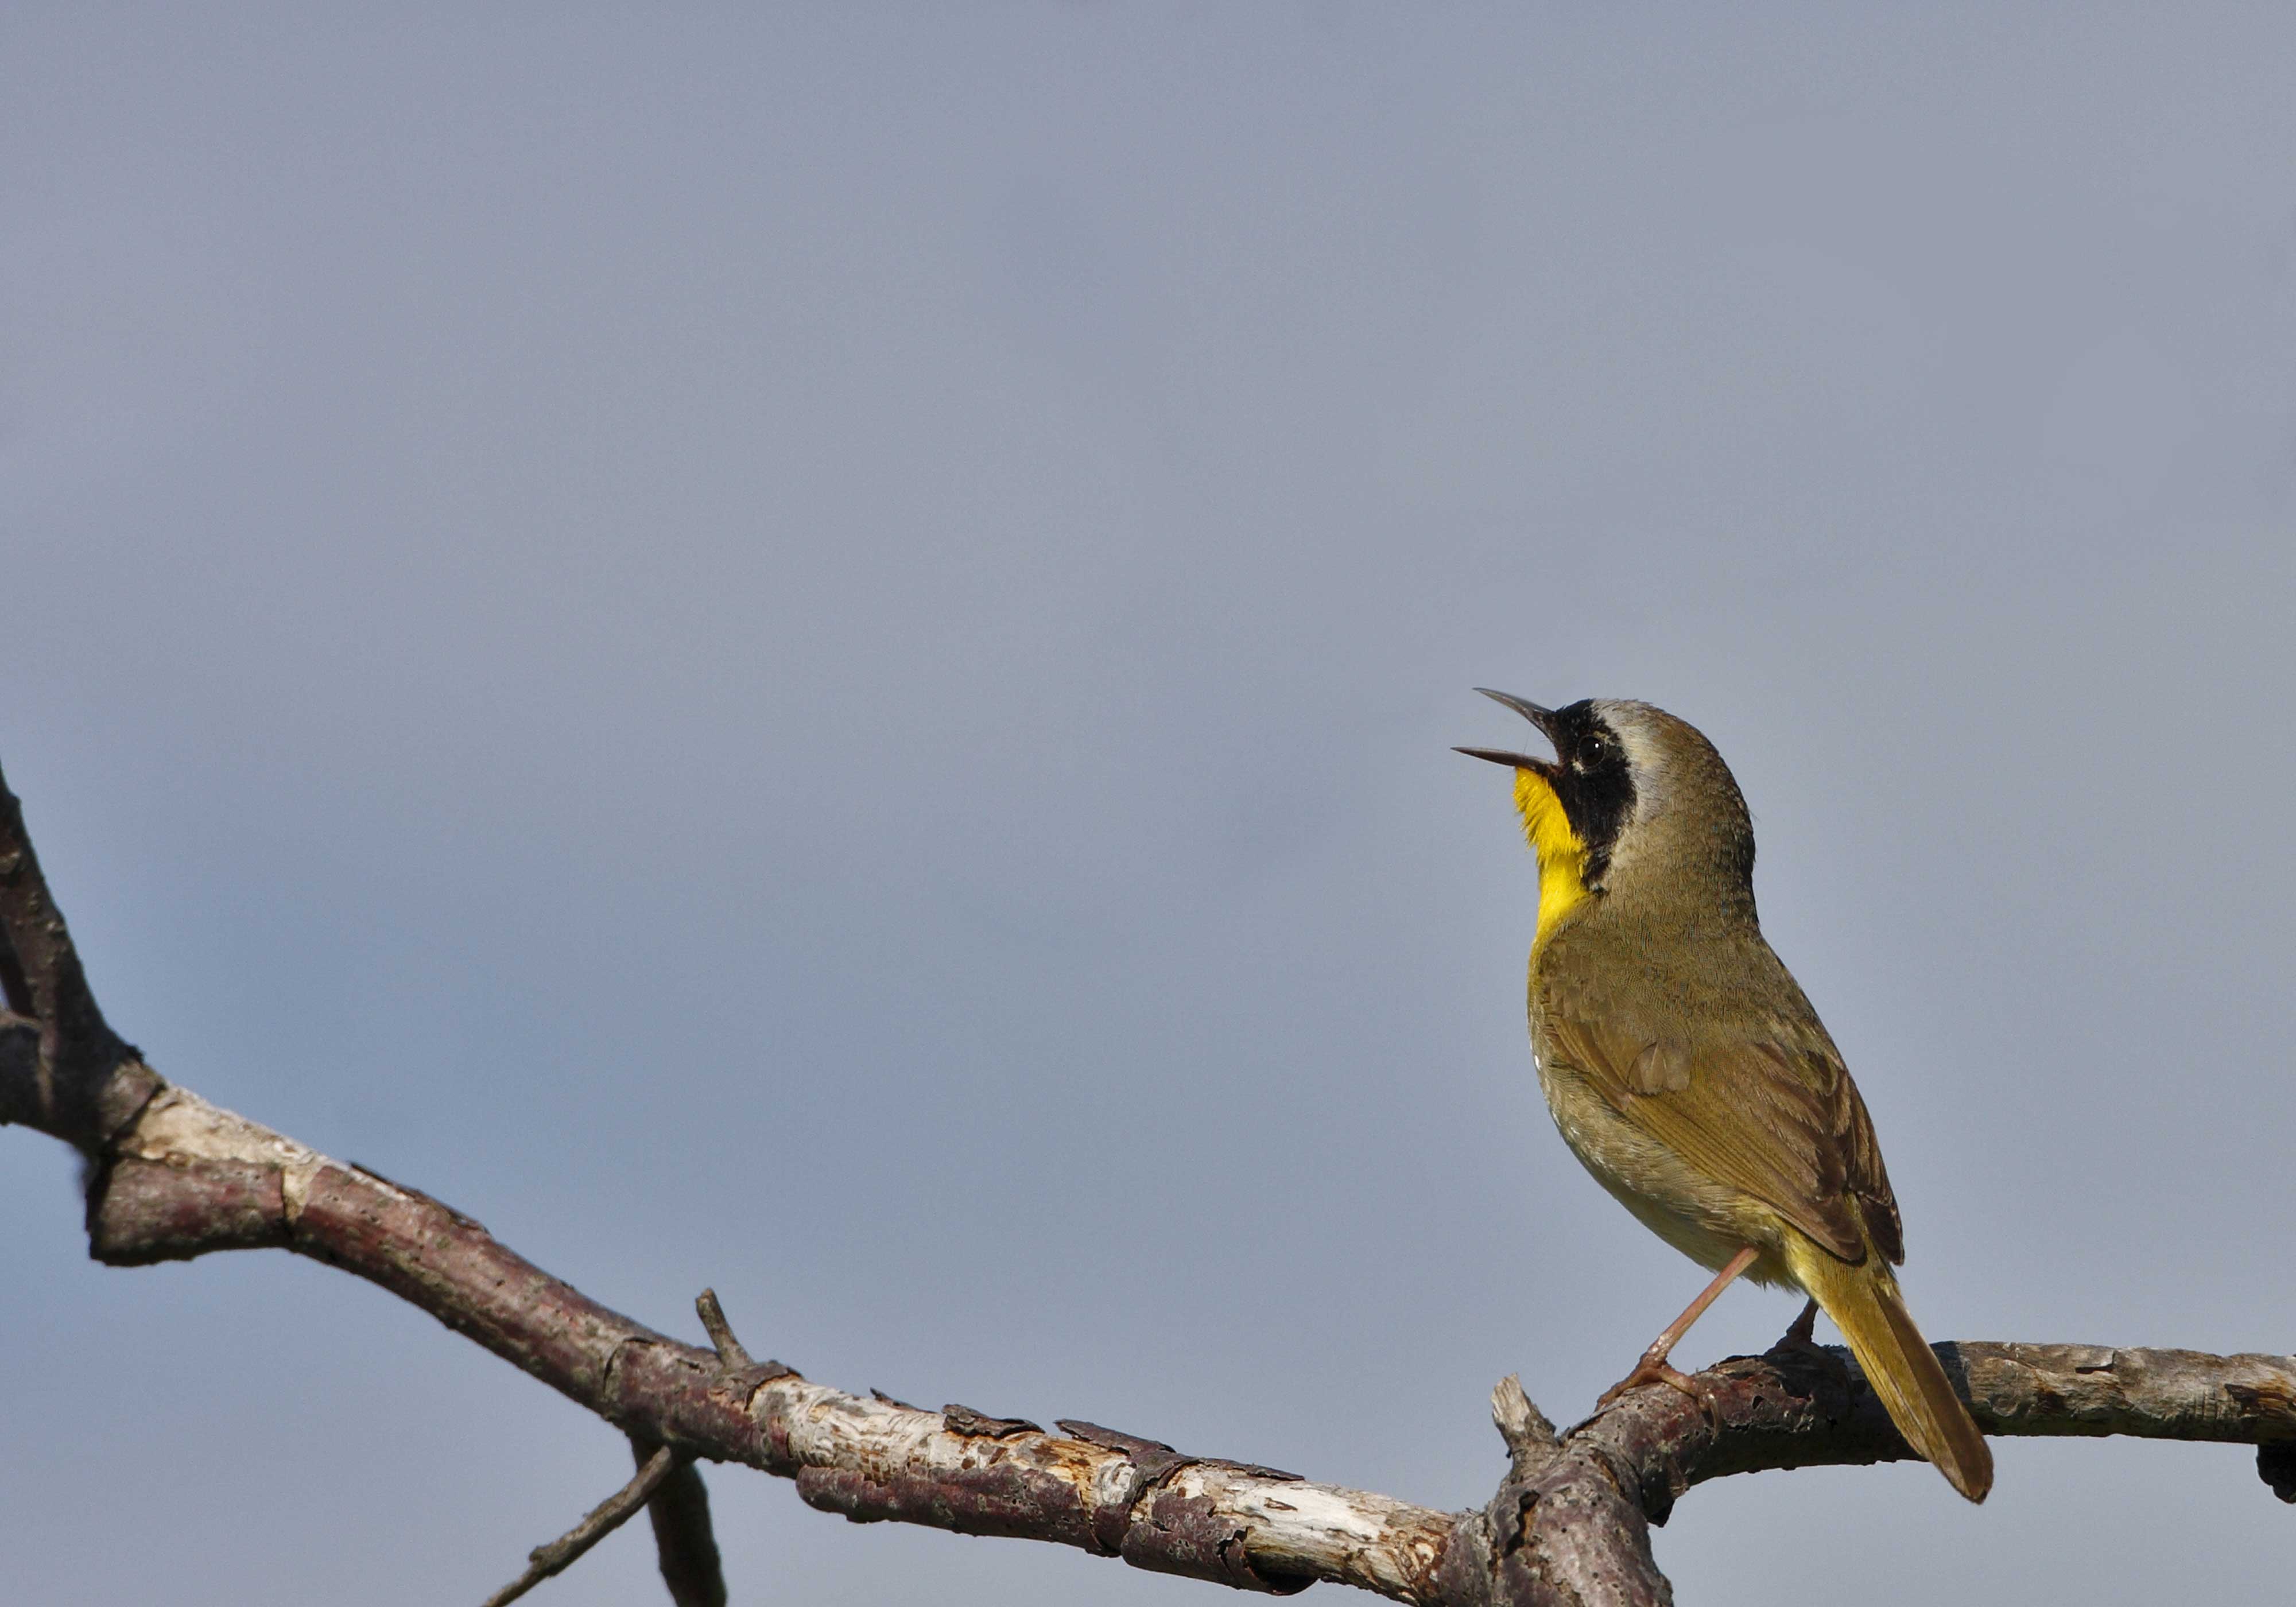 A common yellowthroat on a branch with its mouth open.